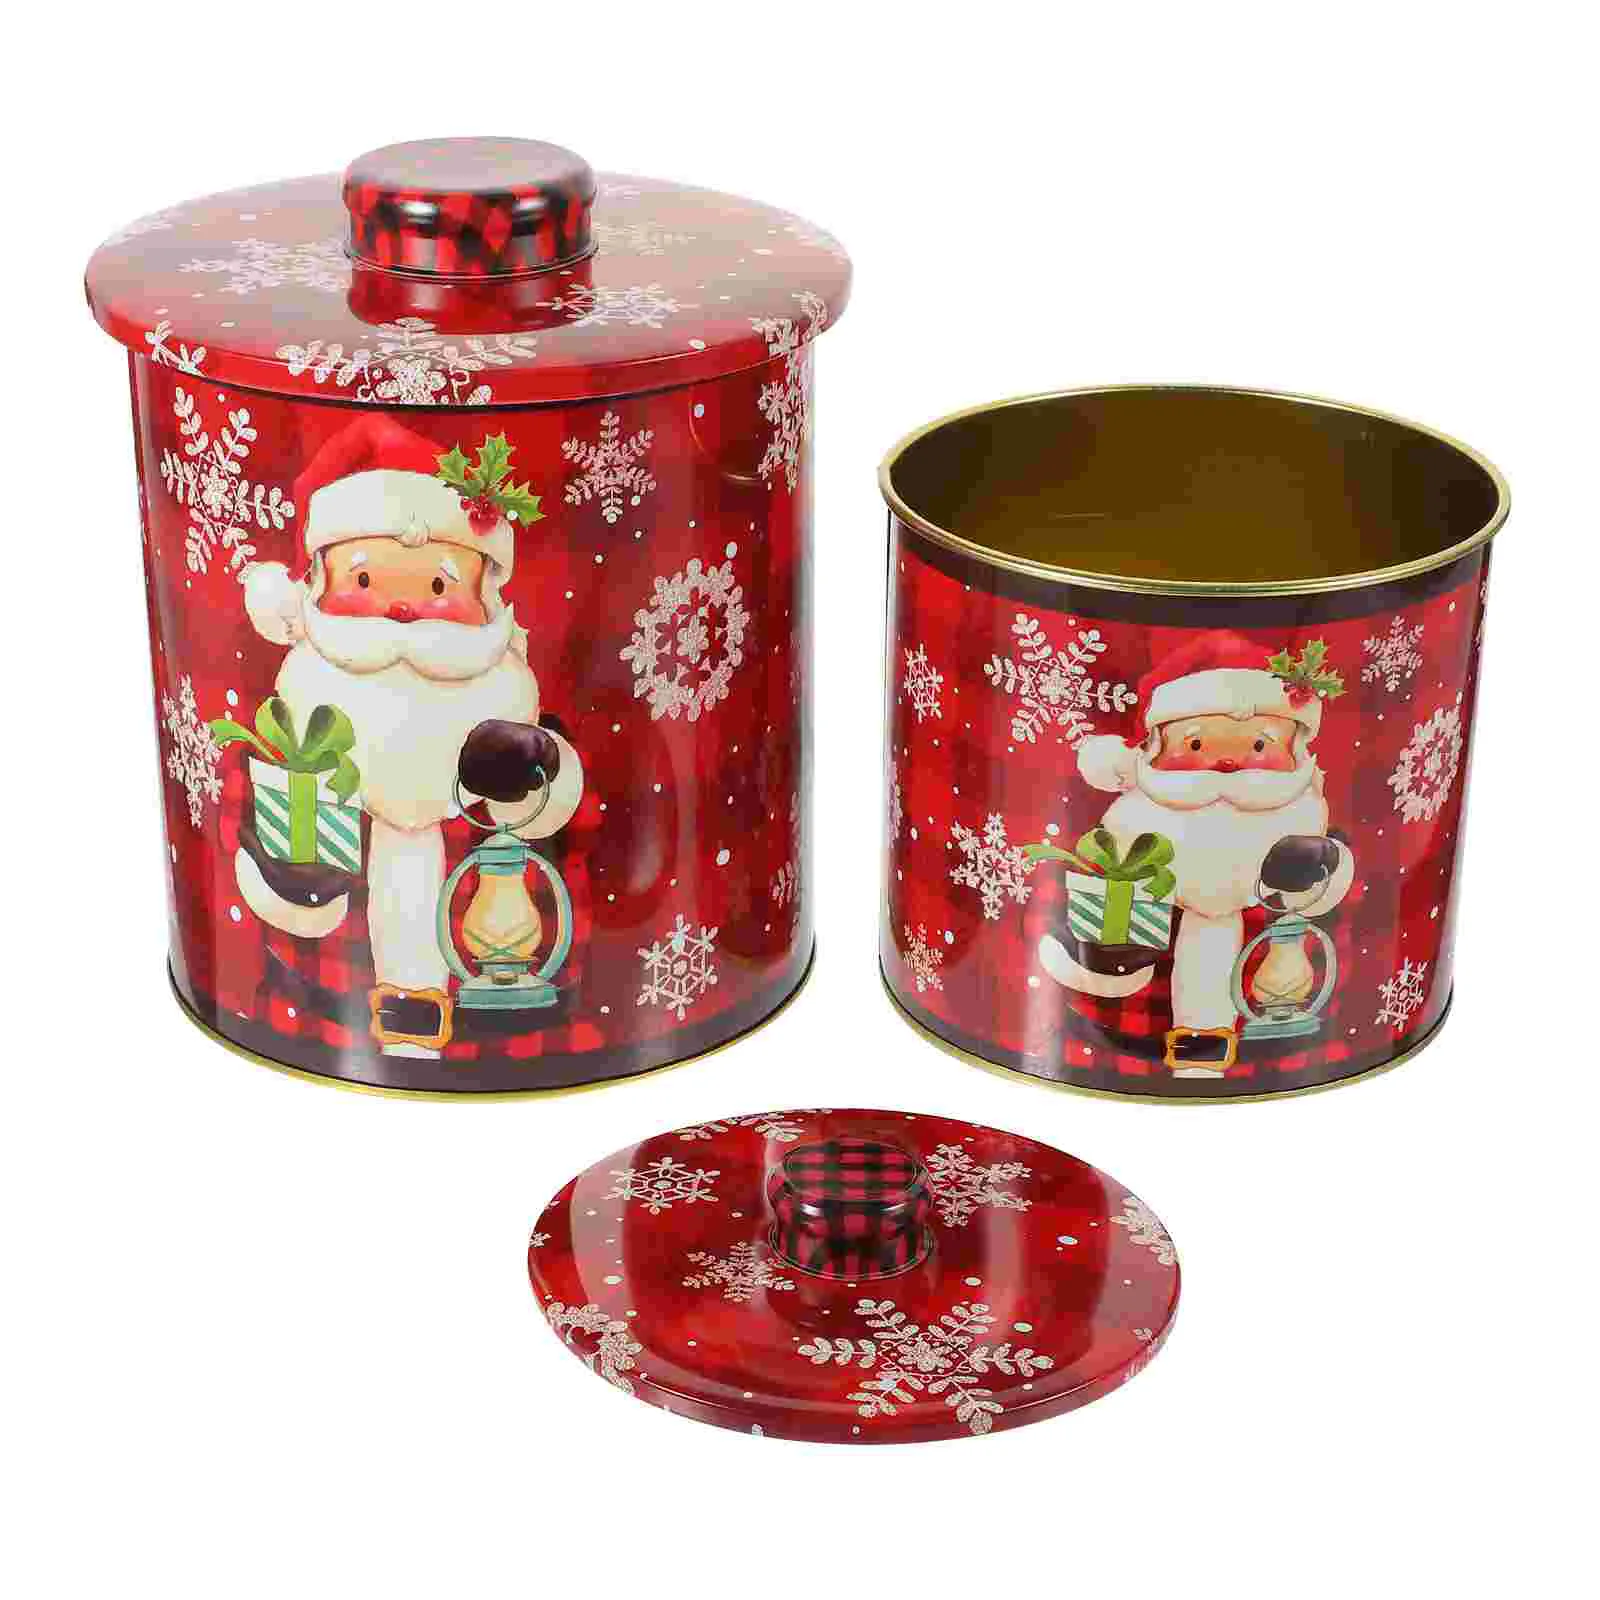 

2 Pcs Tinplate Candy Jar Christmas Supplies for Treats Jars Cookie Boxes Metal Container with Lid Containers Wrought Iron